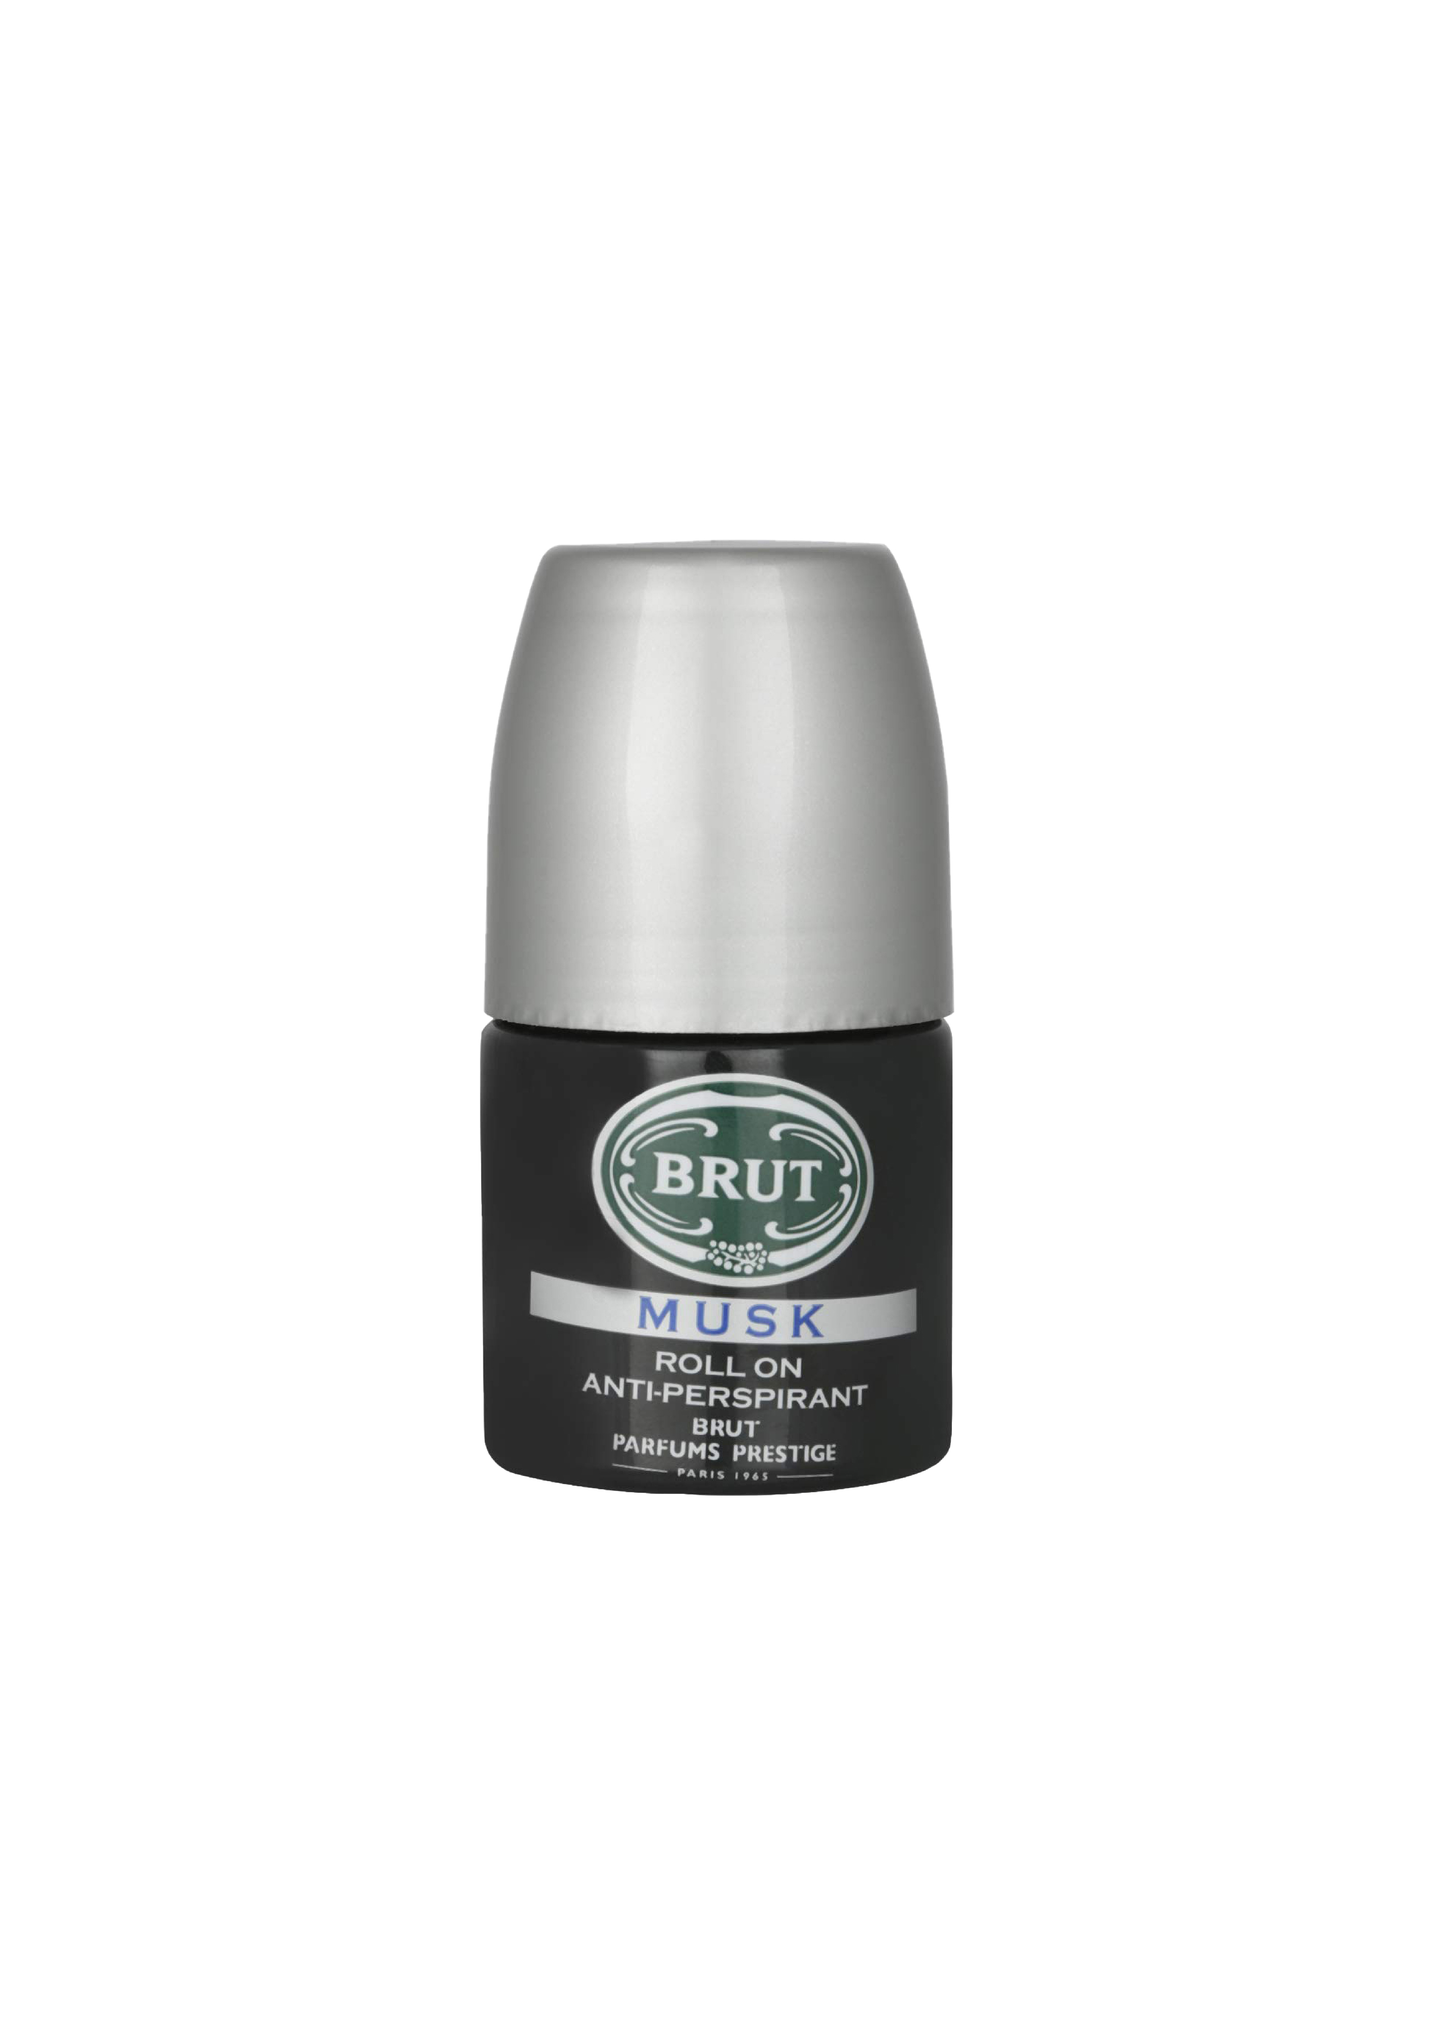 Brut deo roll-on 50ml musk